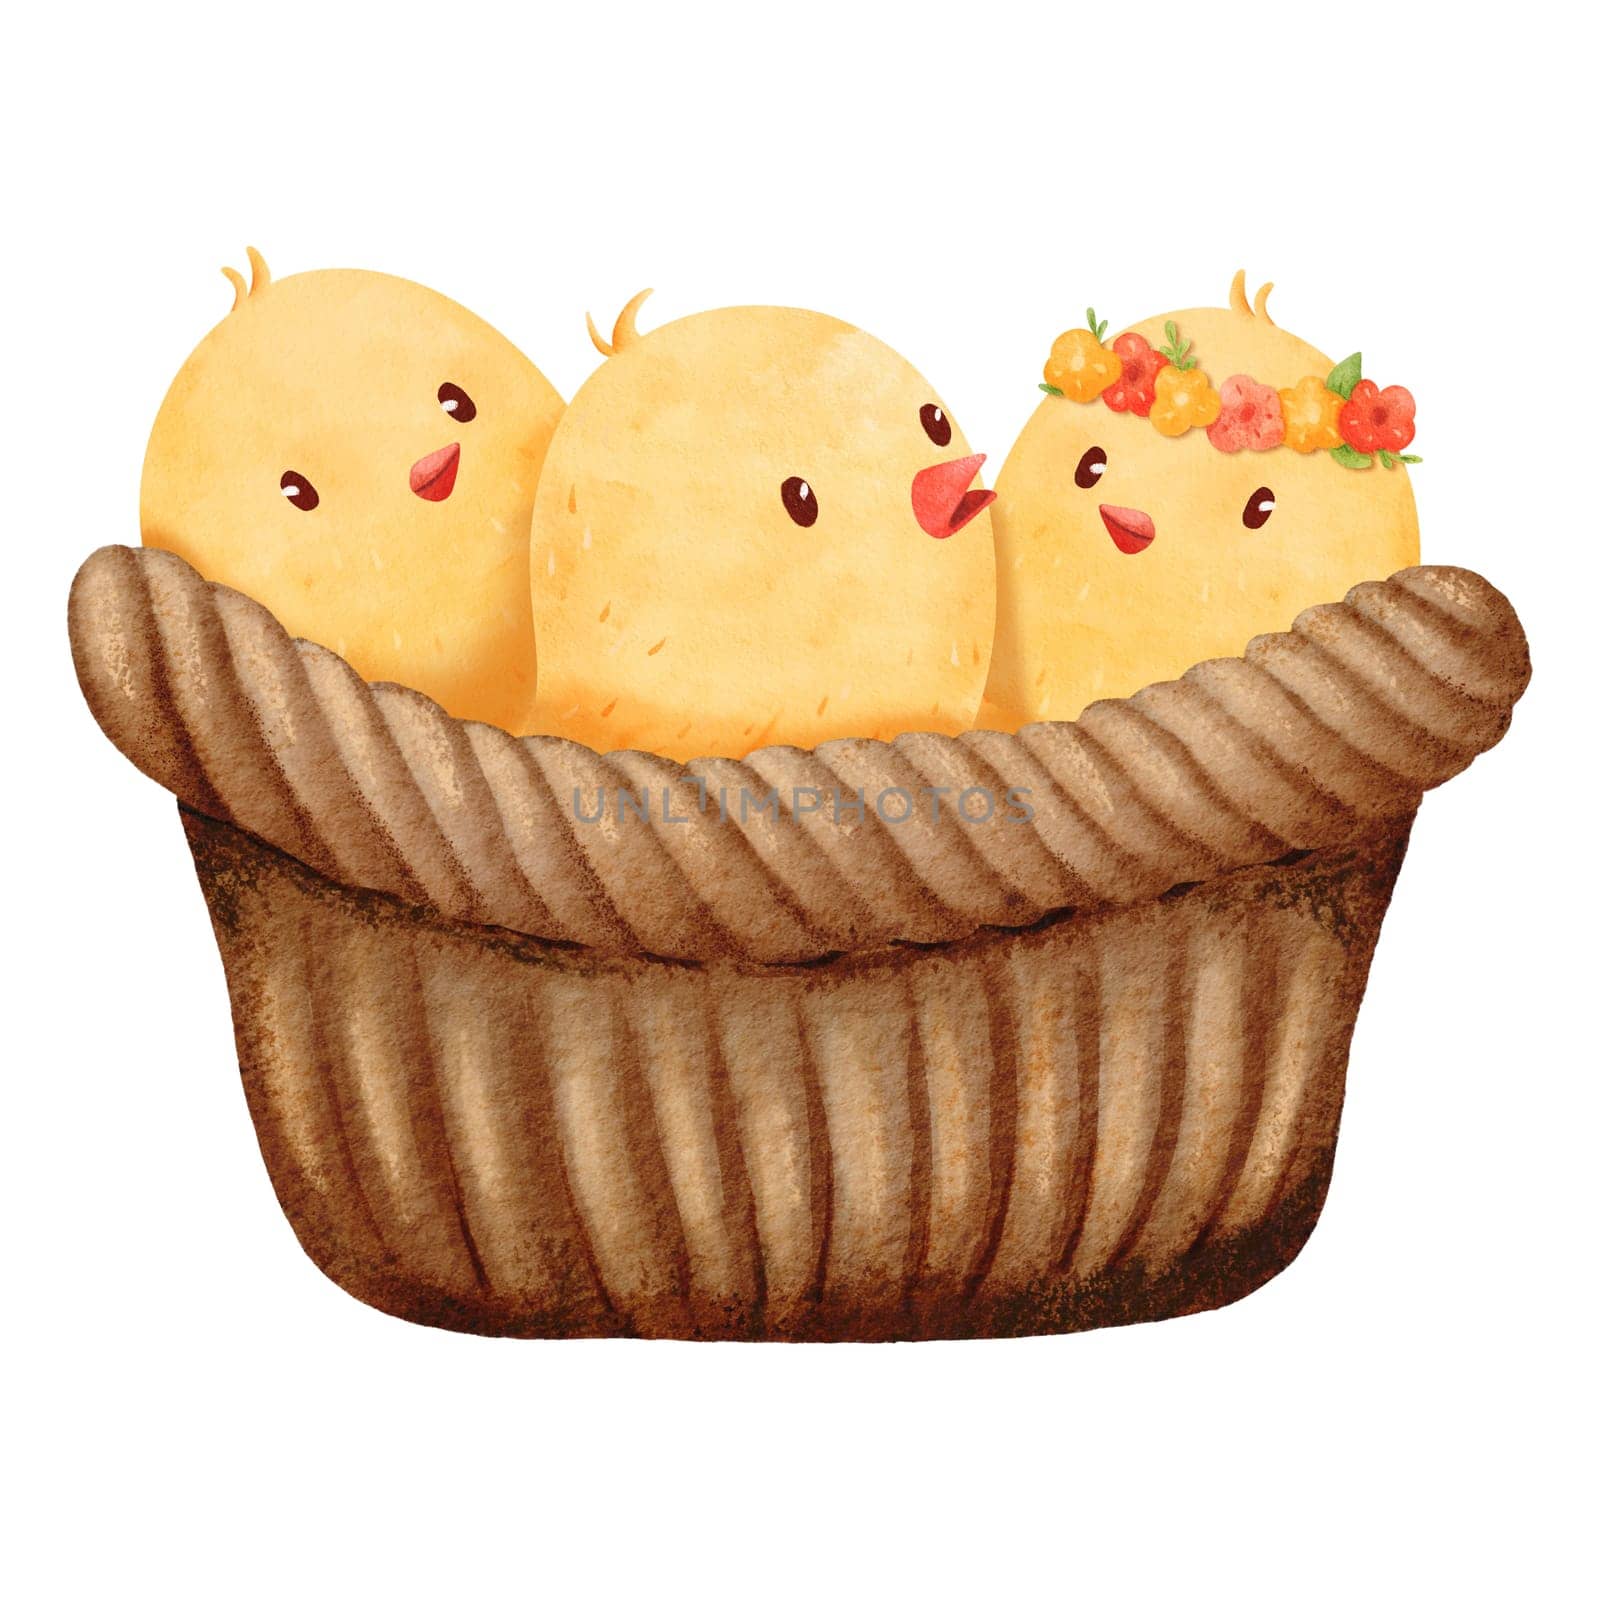 Brown woven basket with adorable little chicks inside. Watercolor illustration with the charm of newborn chicks in a rustic setting. for conveying a heartwarming farm atmosphere. for cards, and prints by Art_Mari_Ka